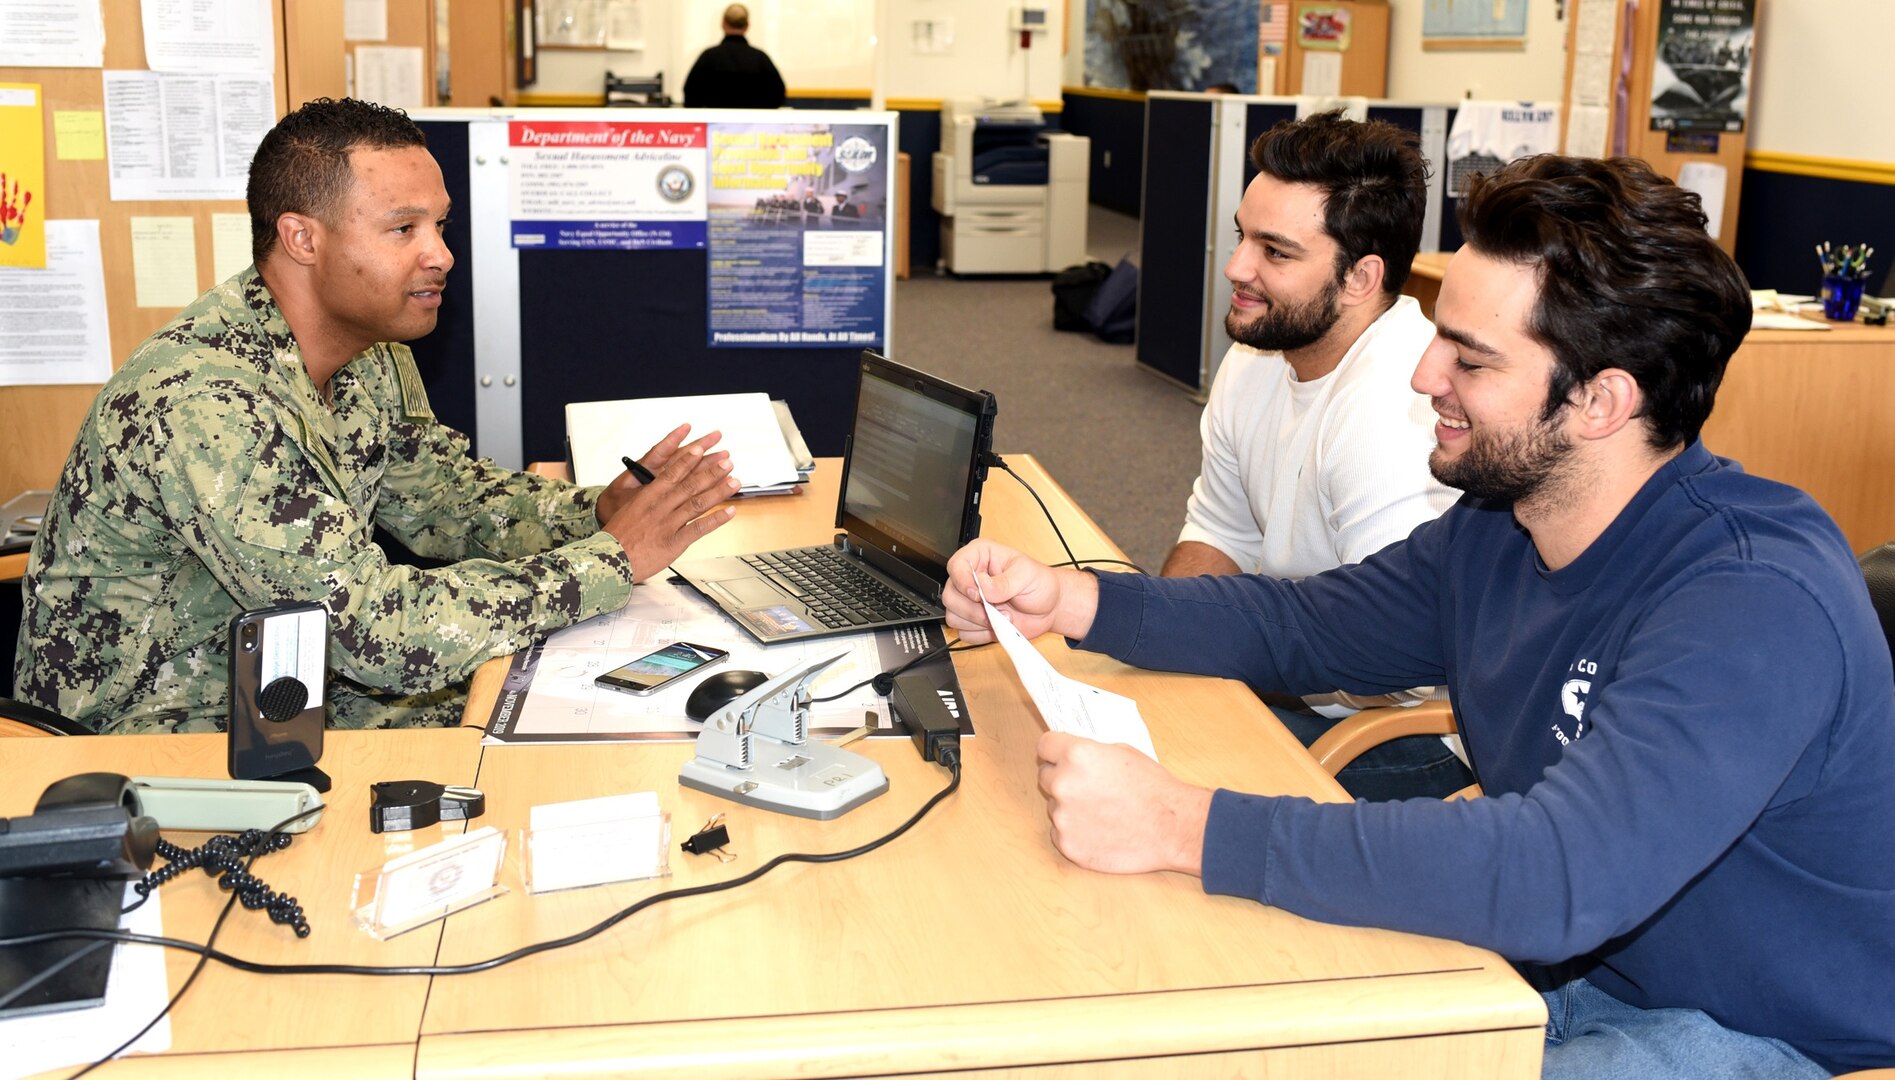 Petty Officer 1st Class Russell Sylve, Navy Recruiting Station  Mercado, talks with twin brothers Stephen and George Coppage of San Antonio during a weekly Delayed Entry Program Re-certification at the NRS.  The Coppage brothers are 2011 graduates of Louis D. Brandeis High School and joined the Navy to pursue careers in aviation support. They were recruited by Petty Officer 2nd Class Brooks Anderson of NRS Mercado.